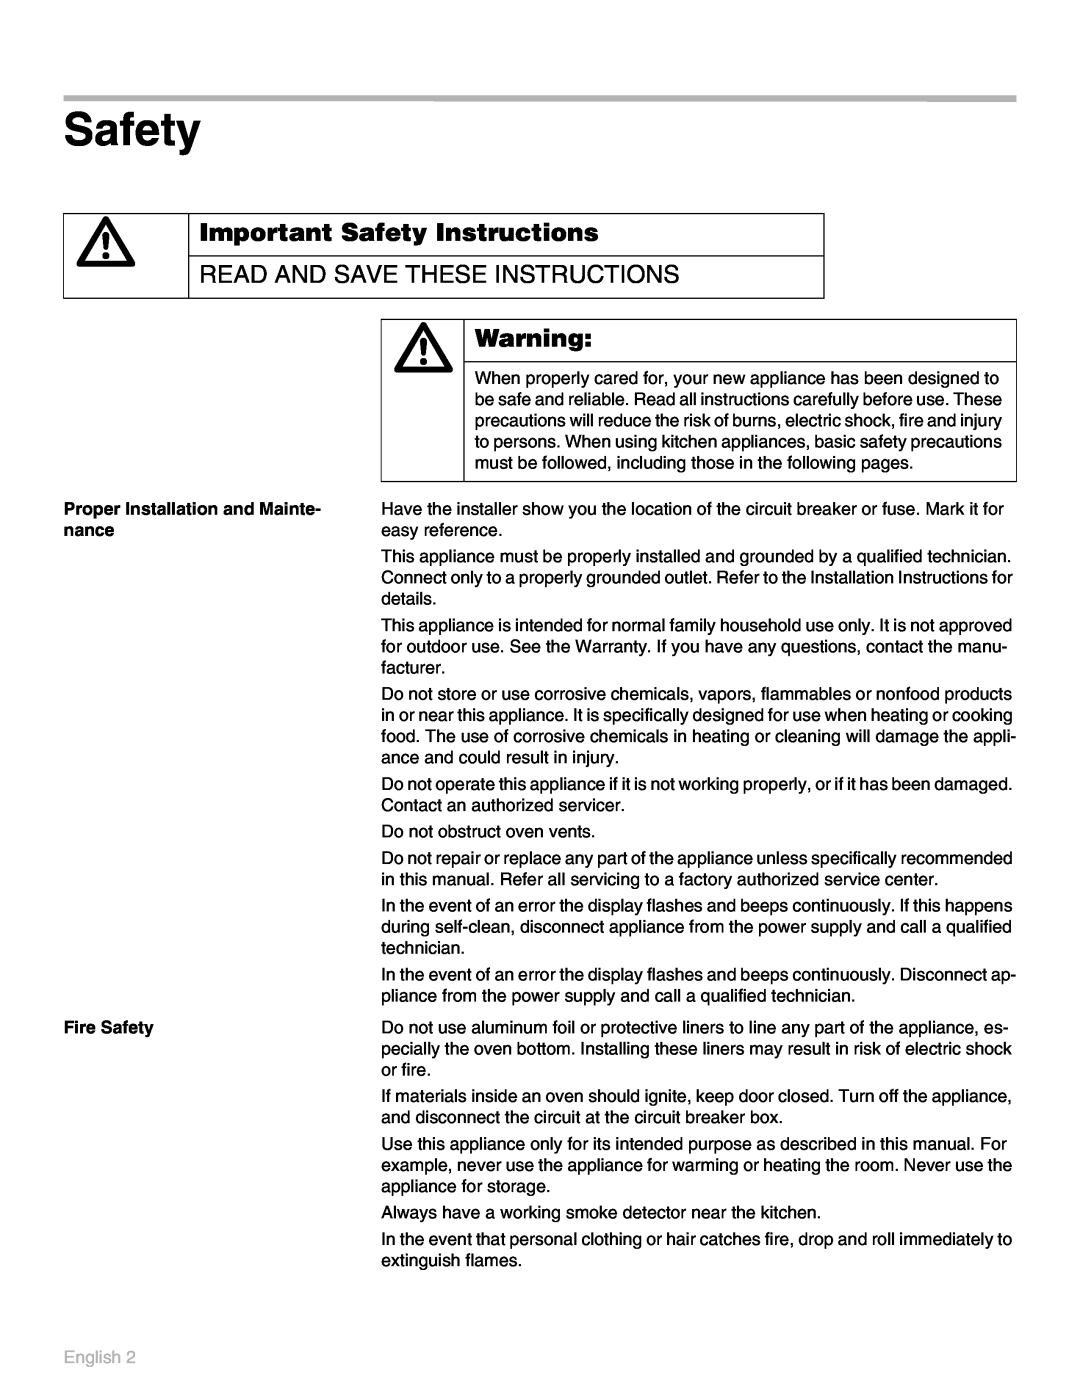 Thermador POD 302 manual Safety, Read And Save These Instructions, English 